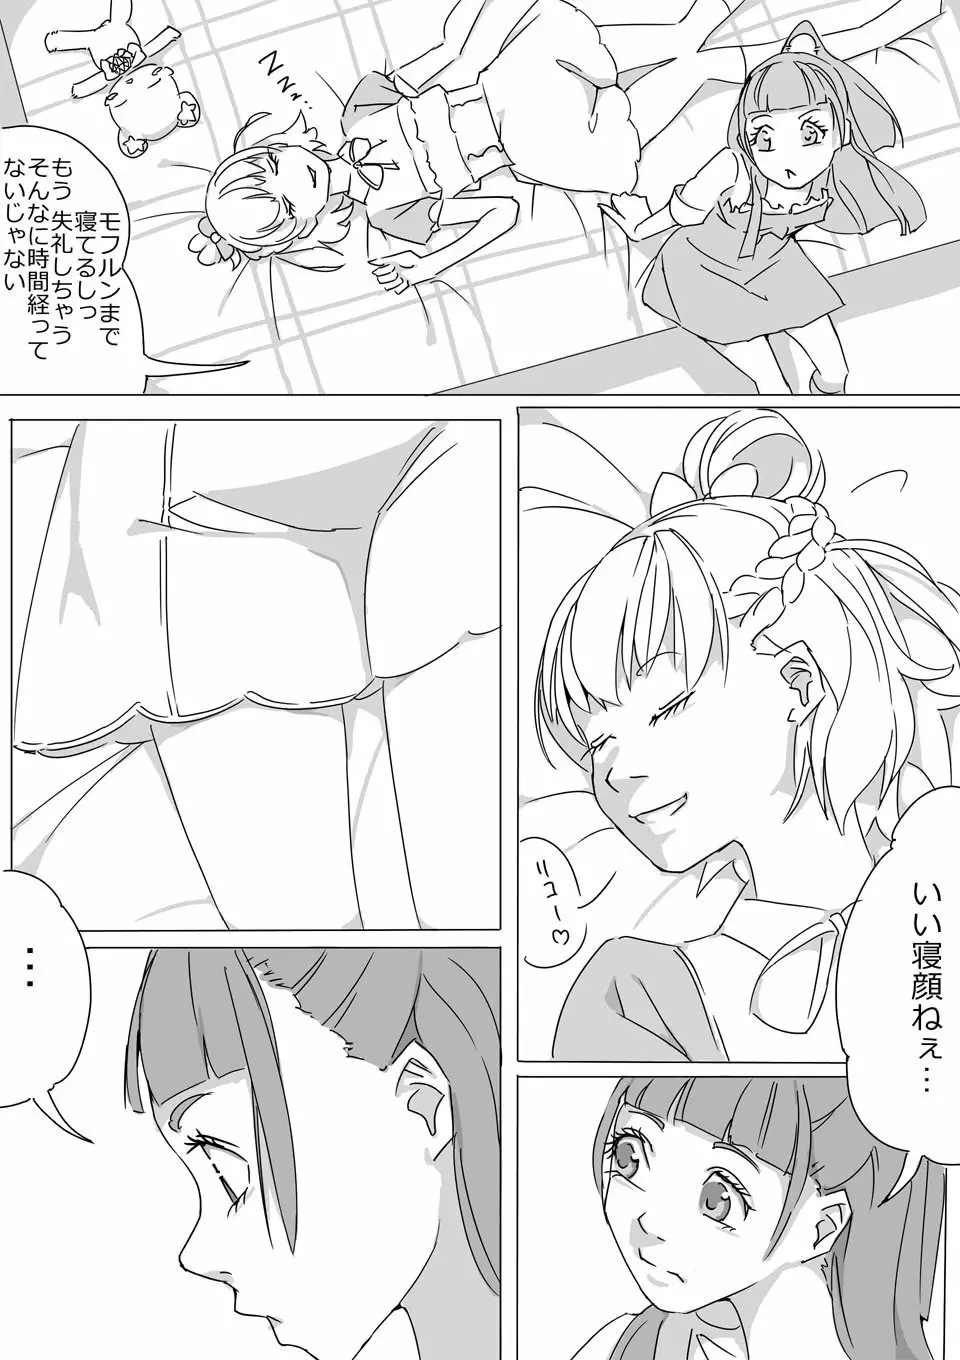 Untitled Precure Doujinshi - page2